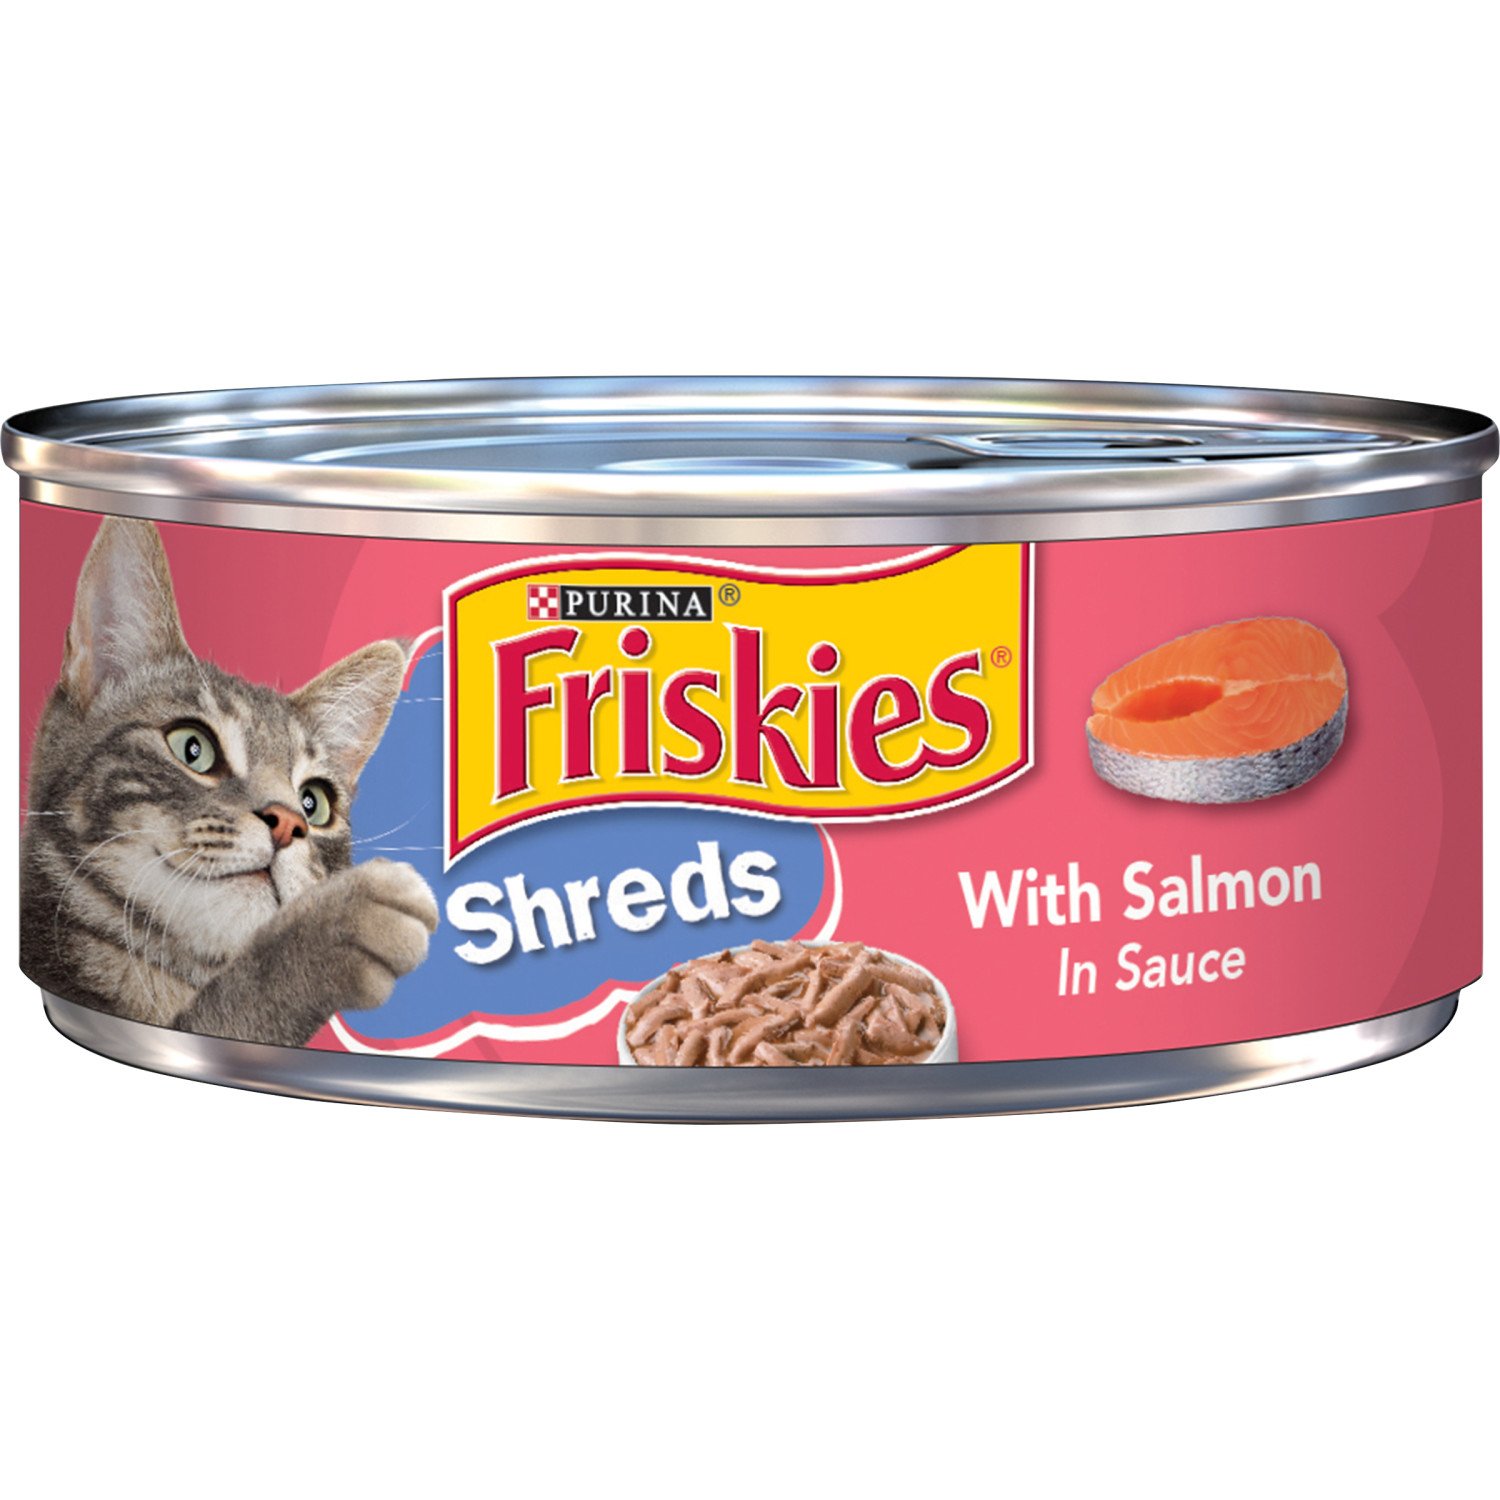 Purina Friskies Savory Shreds Salmon in Sauce Cat Food Shop Cats at HEB